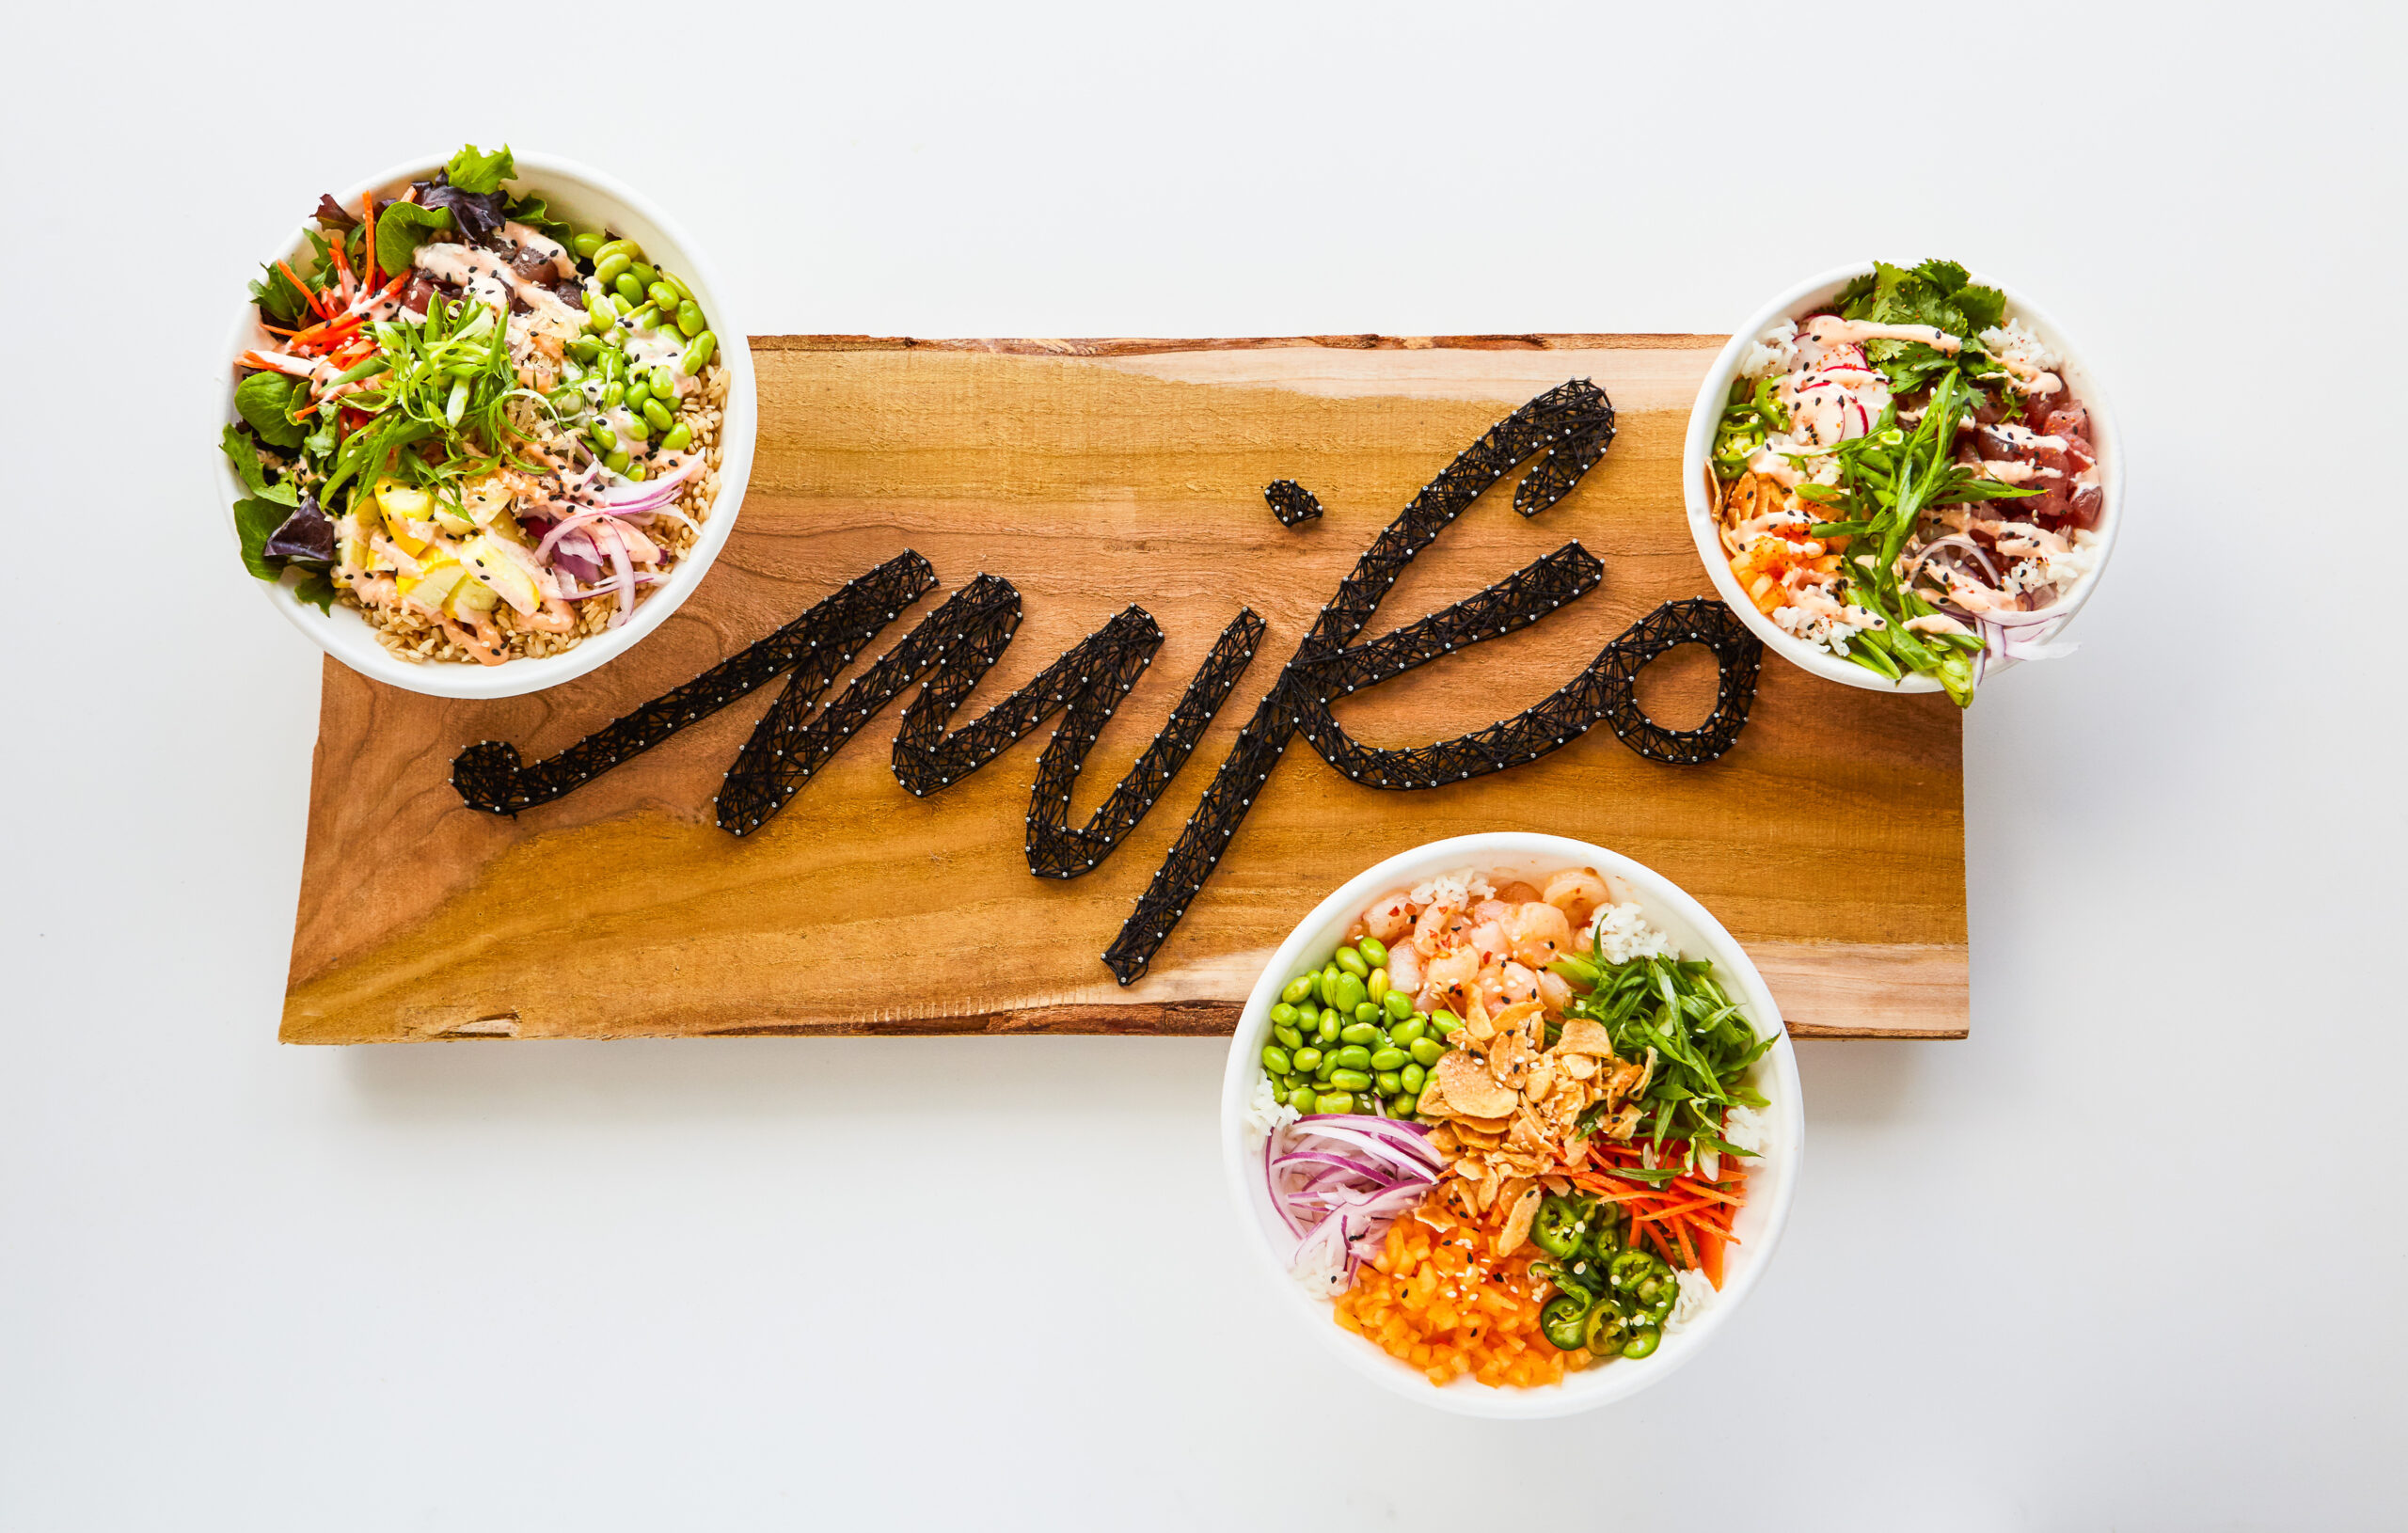 Wood sign featuring string art that spells out "Miko" with 3 bowls that feature vegetable, tuna and spicy chicken sitting around the edges in a graphic visual pattern.